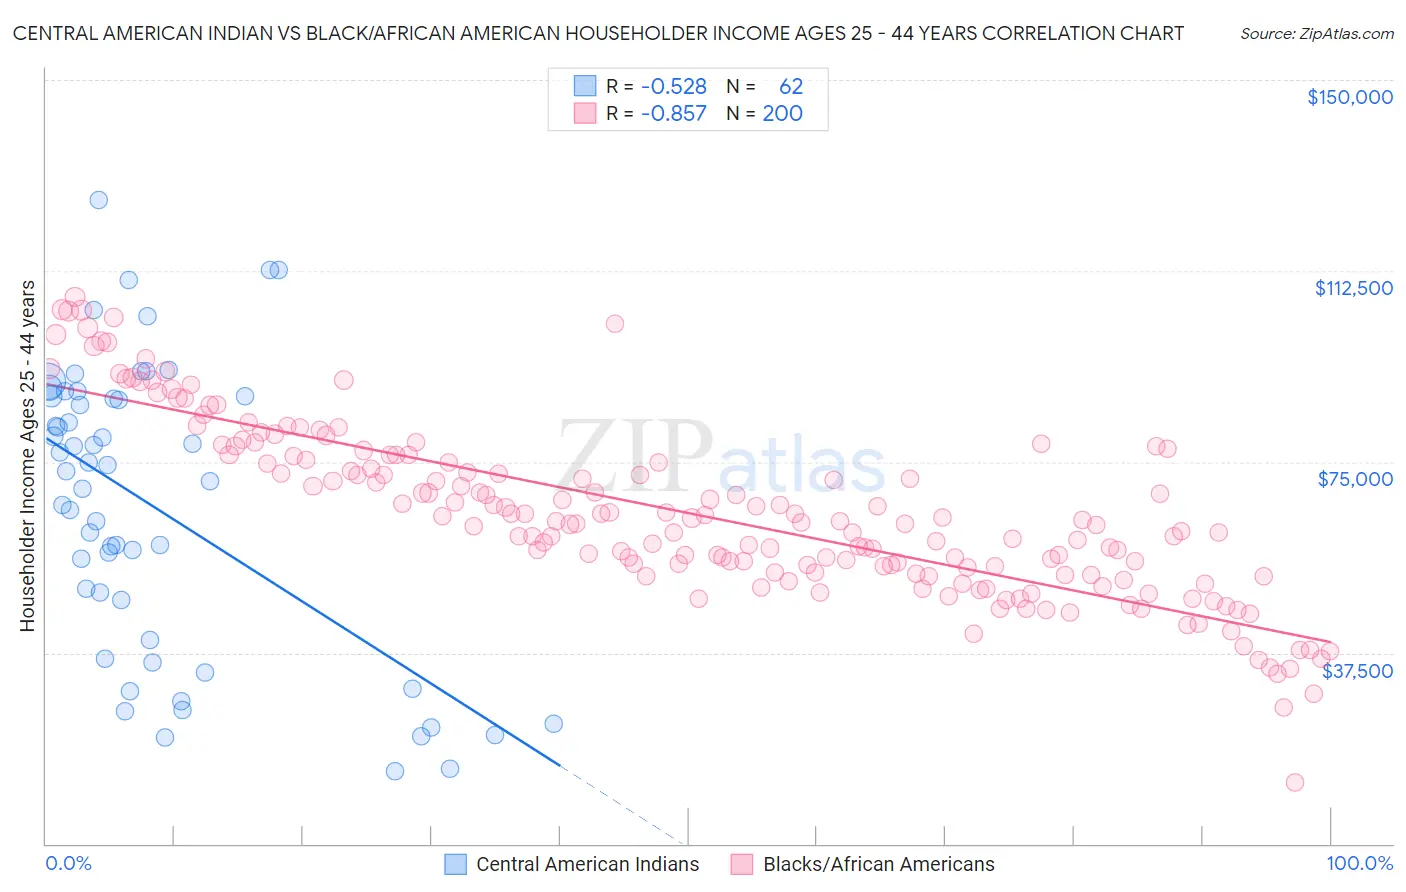 Central American Indian vs Black/African American Householder Income Ages 25 - 44 years